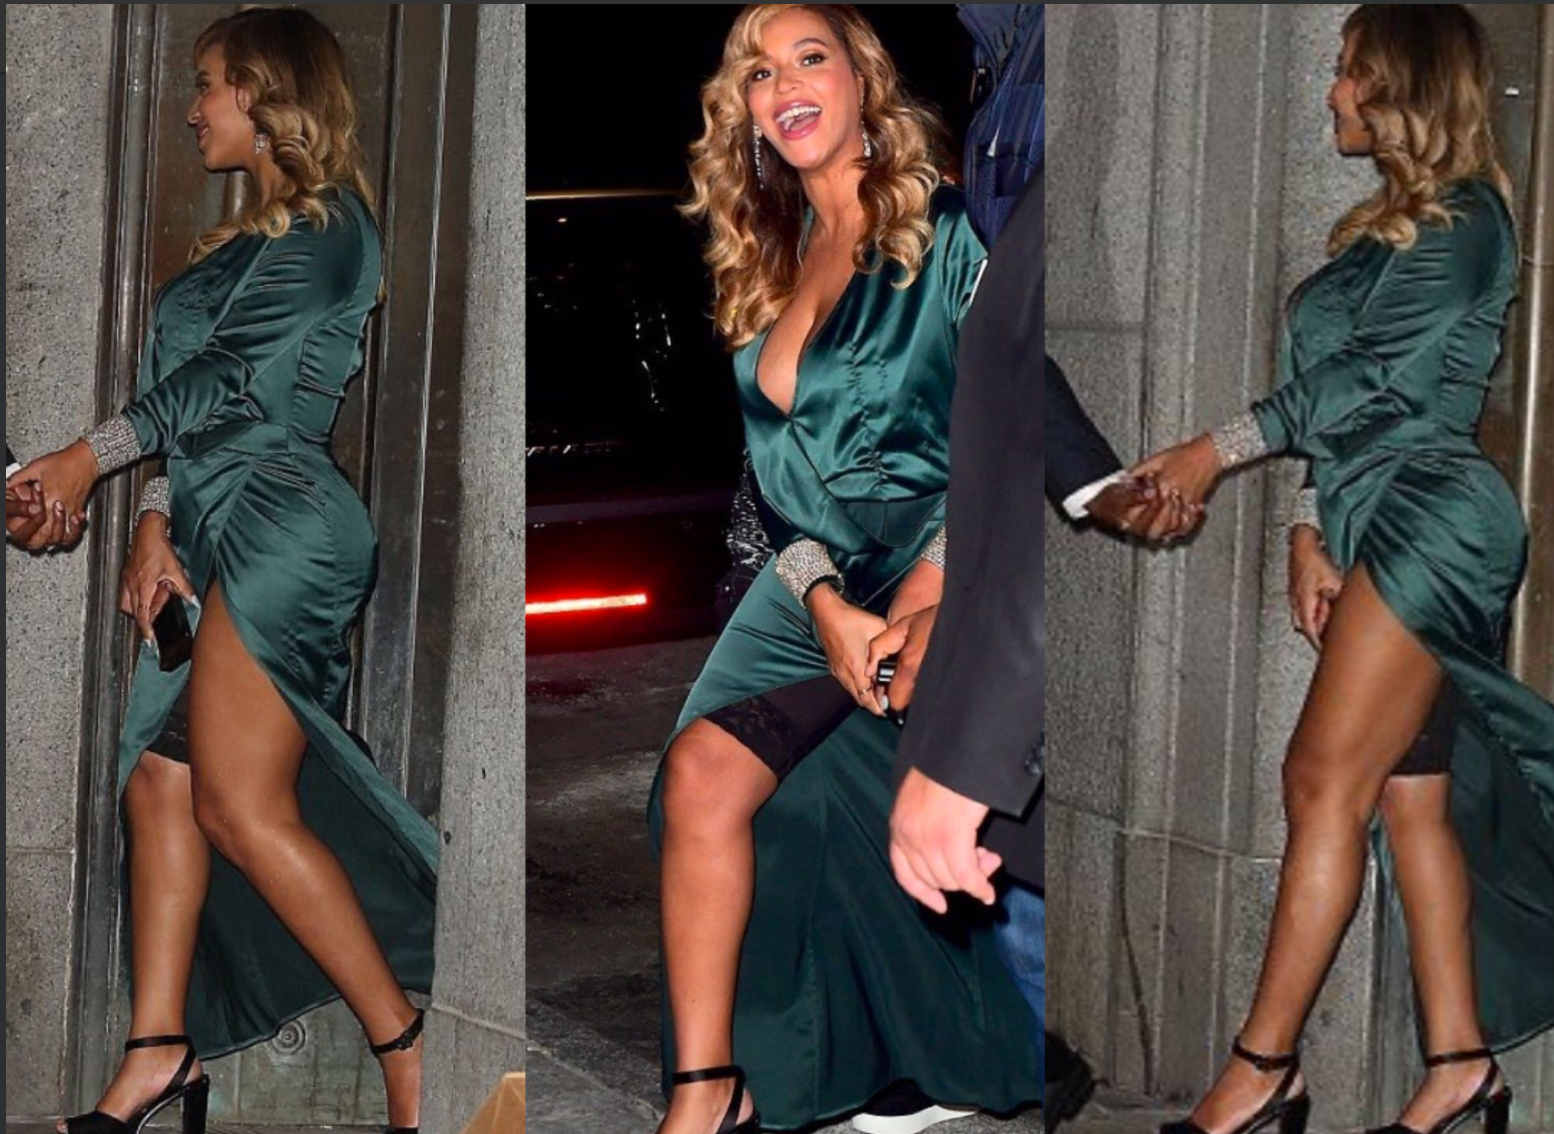 Garner Style - Beyonce for the win with the spanx hack. High slit